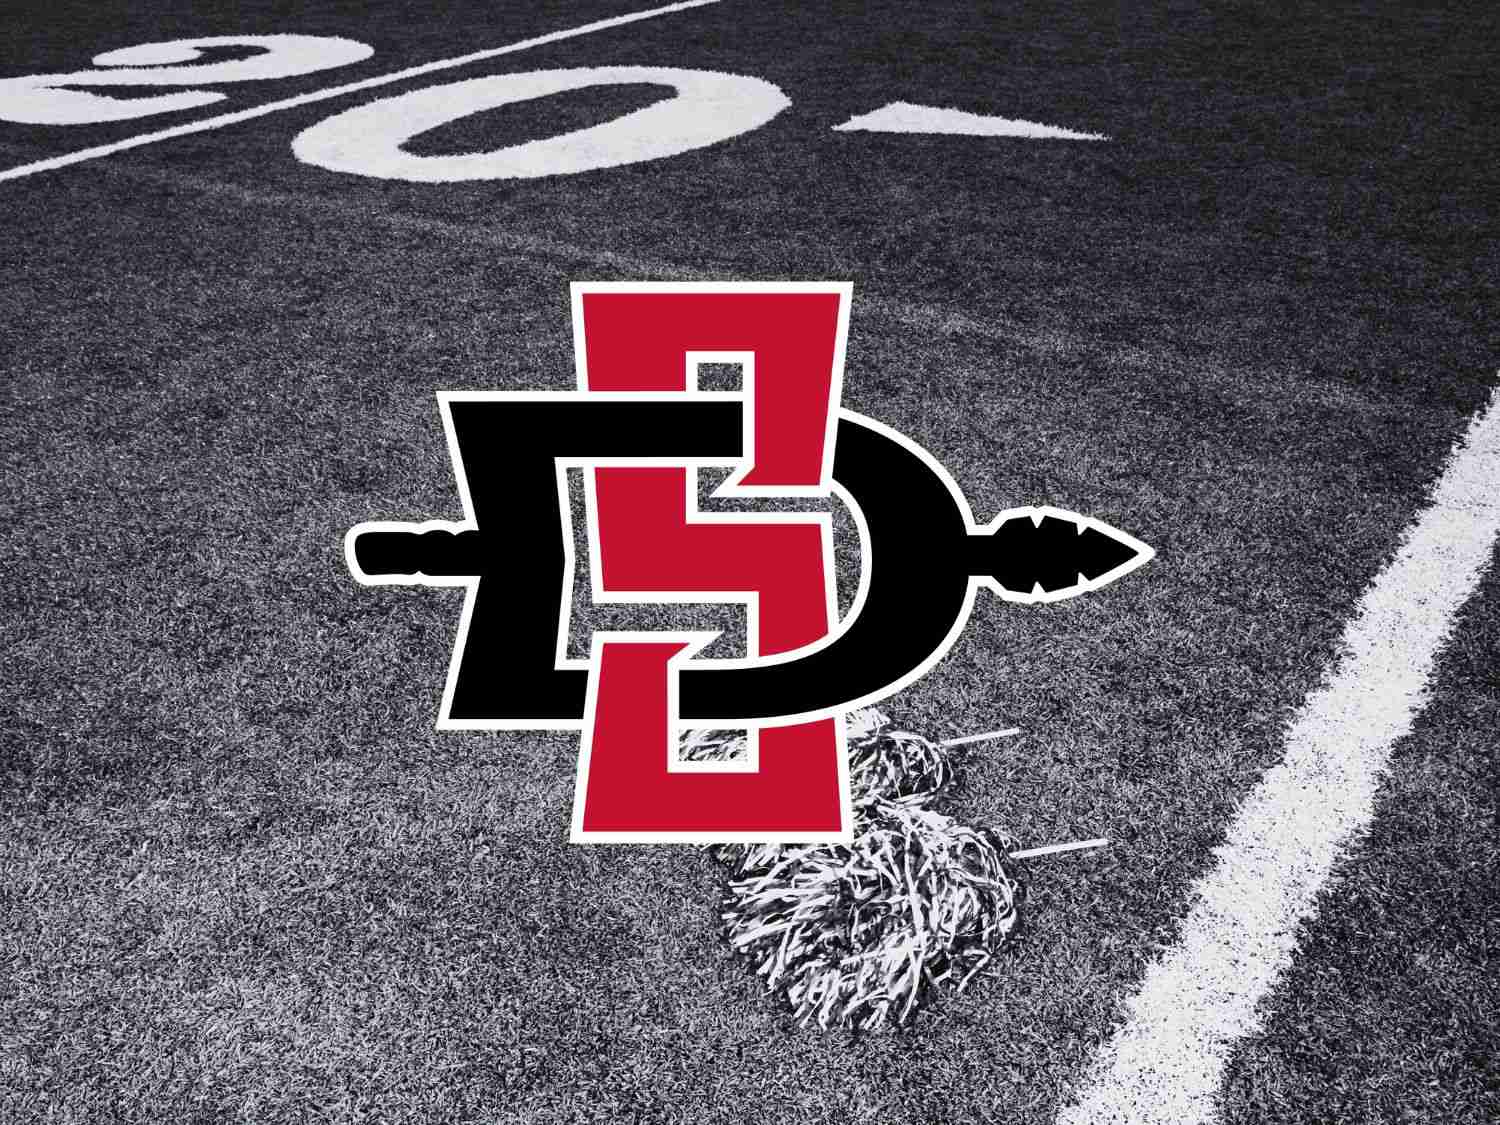 San Diego State Aztecs Football Tickets and Seats